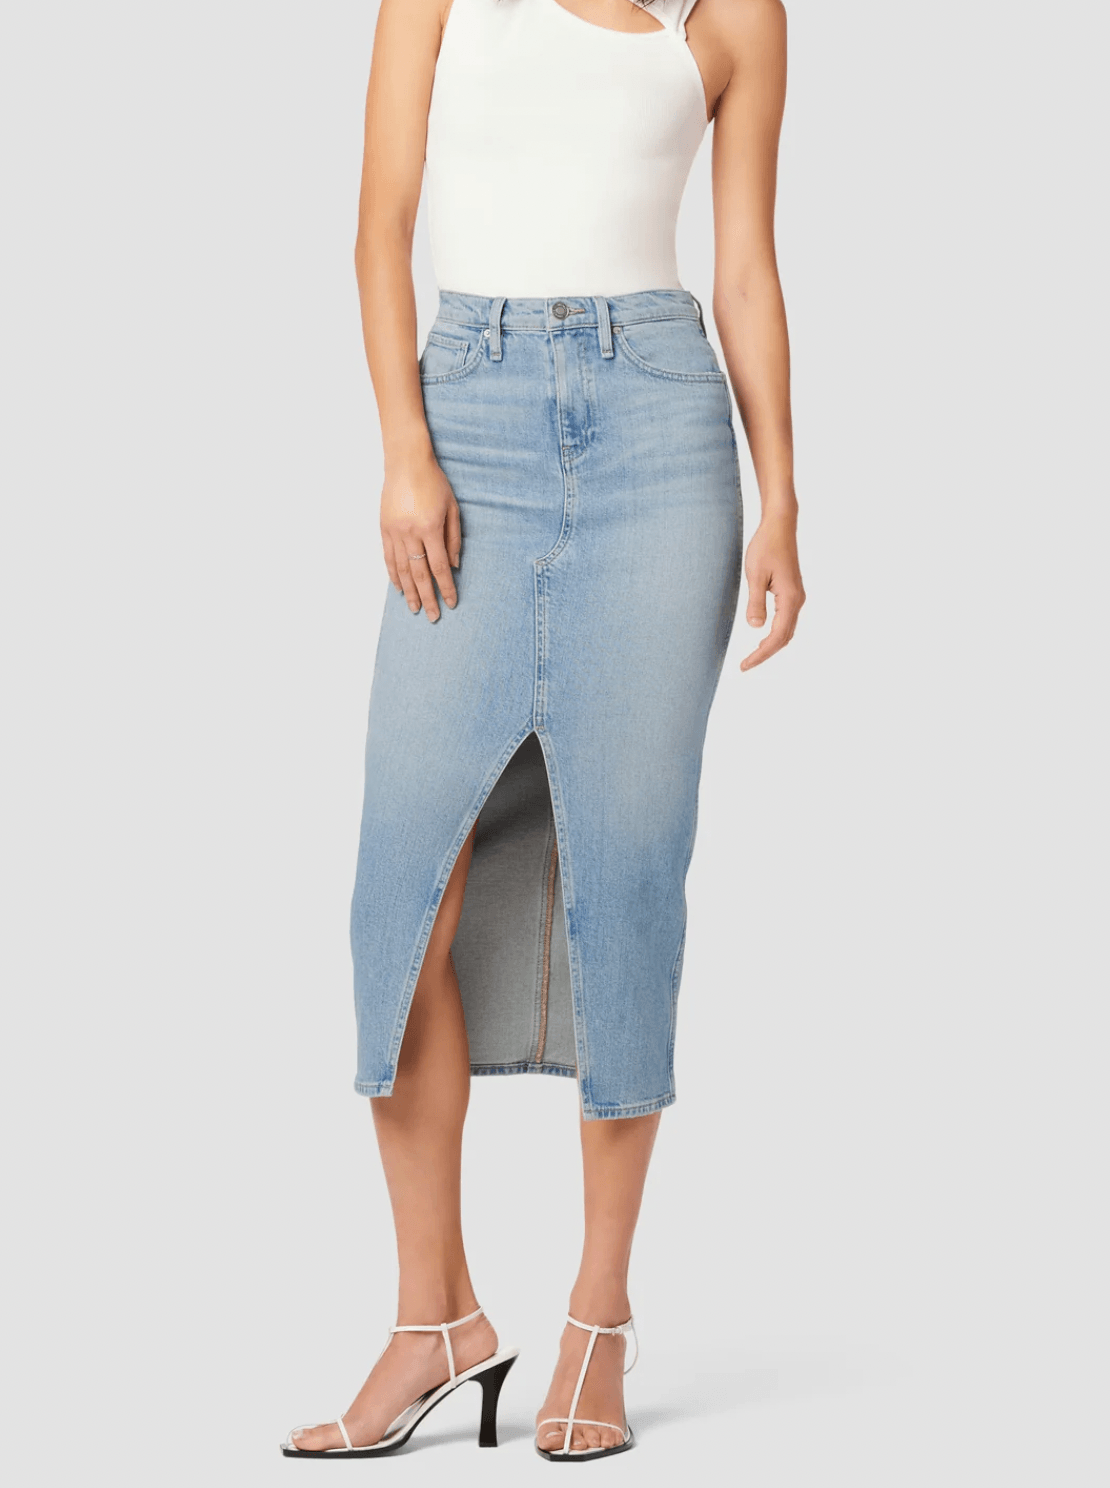 Reconstructed Midi Jean Skirt Offshore by Hudson - Haven